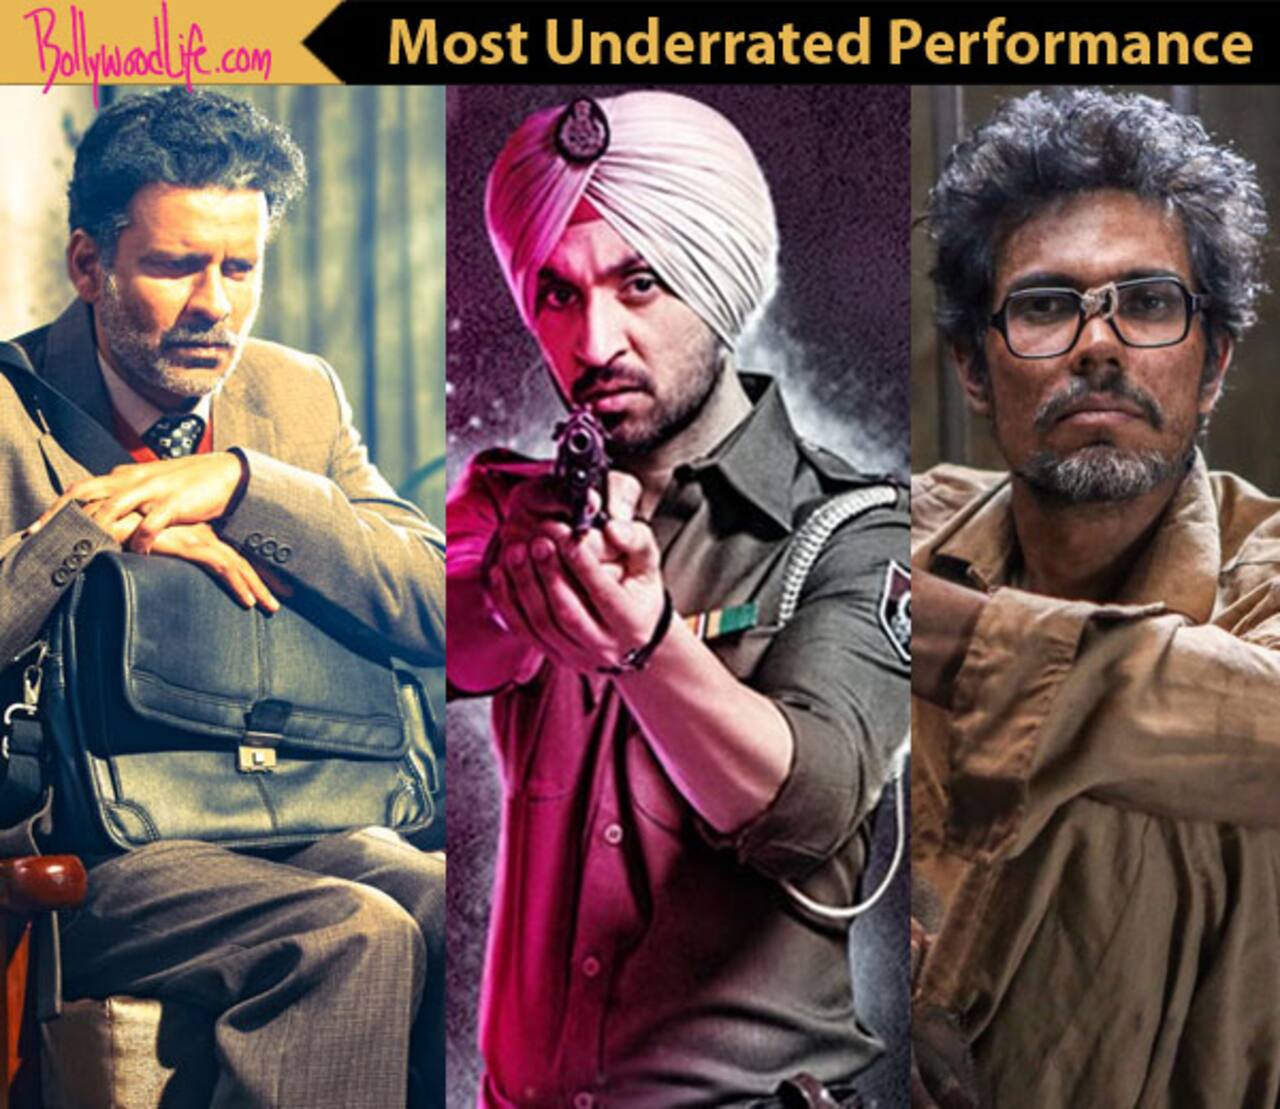 Manoj Bajpayee in Aligarh, Diljit Dosanjh in Udta Punjab, Randeep Hooda in Sarbjit - VOTE for the most underrated performance of 2016